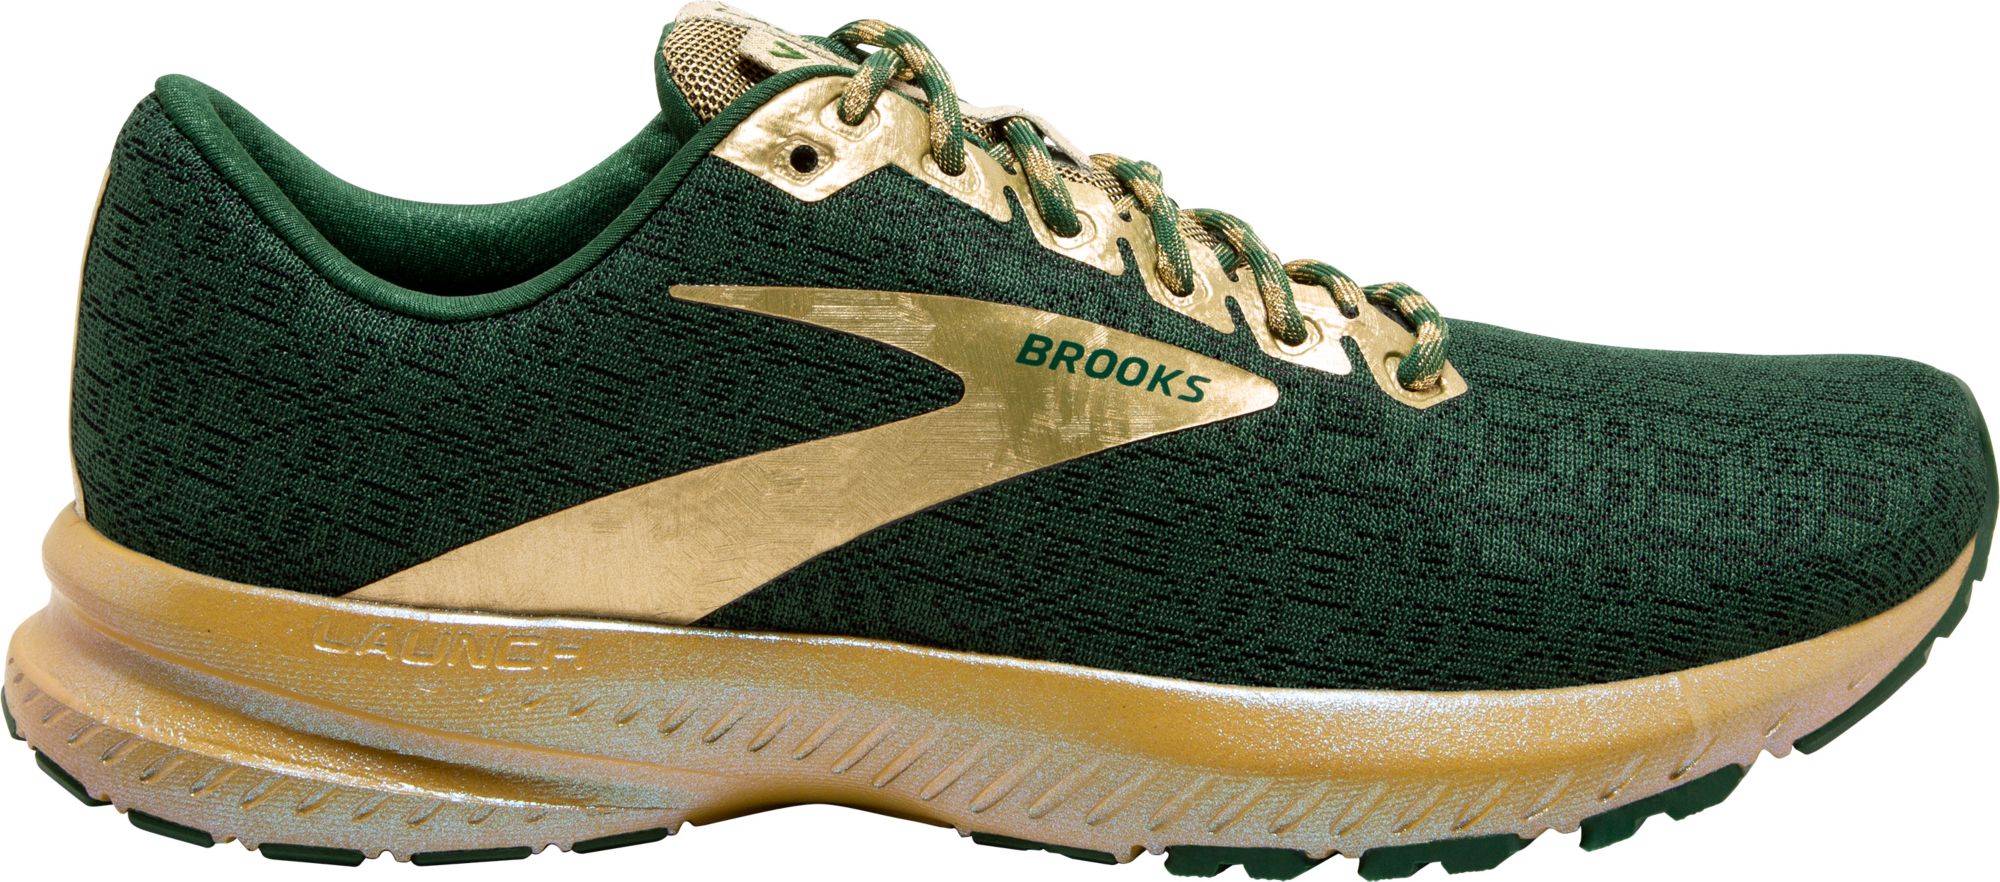 brooks green shoes